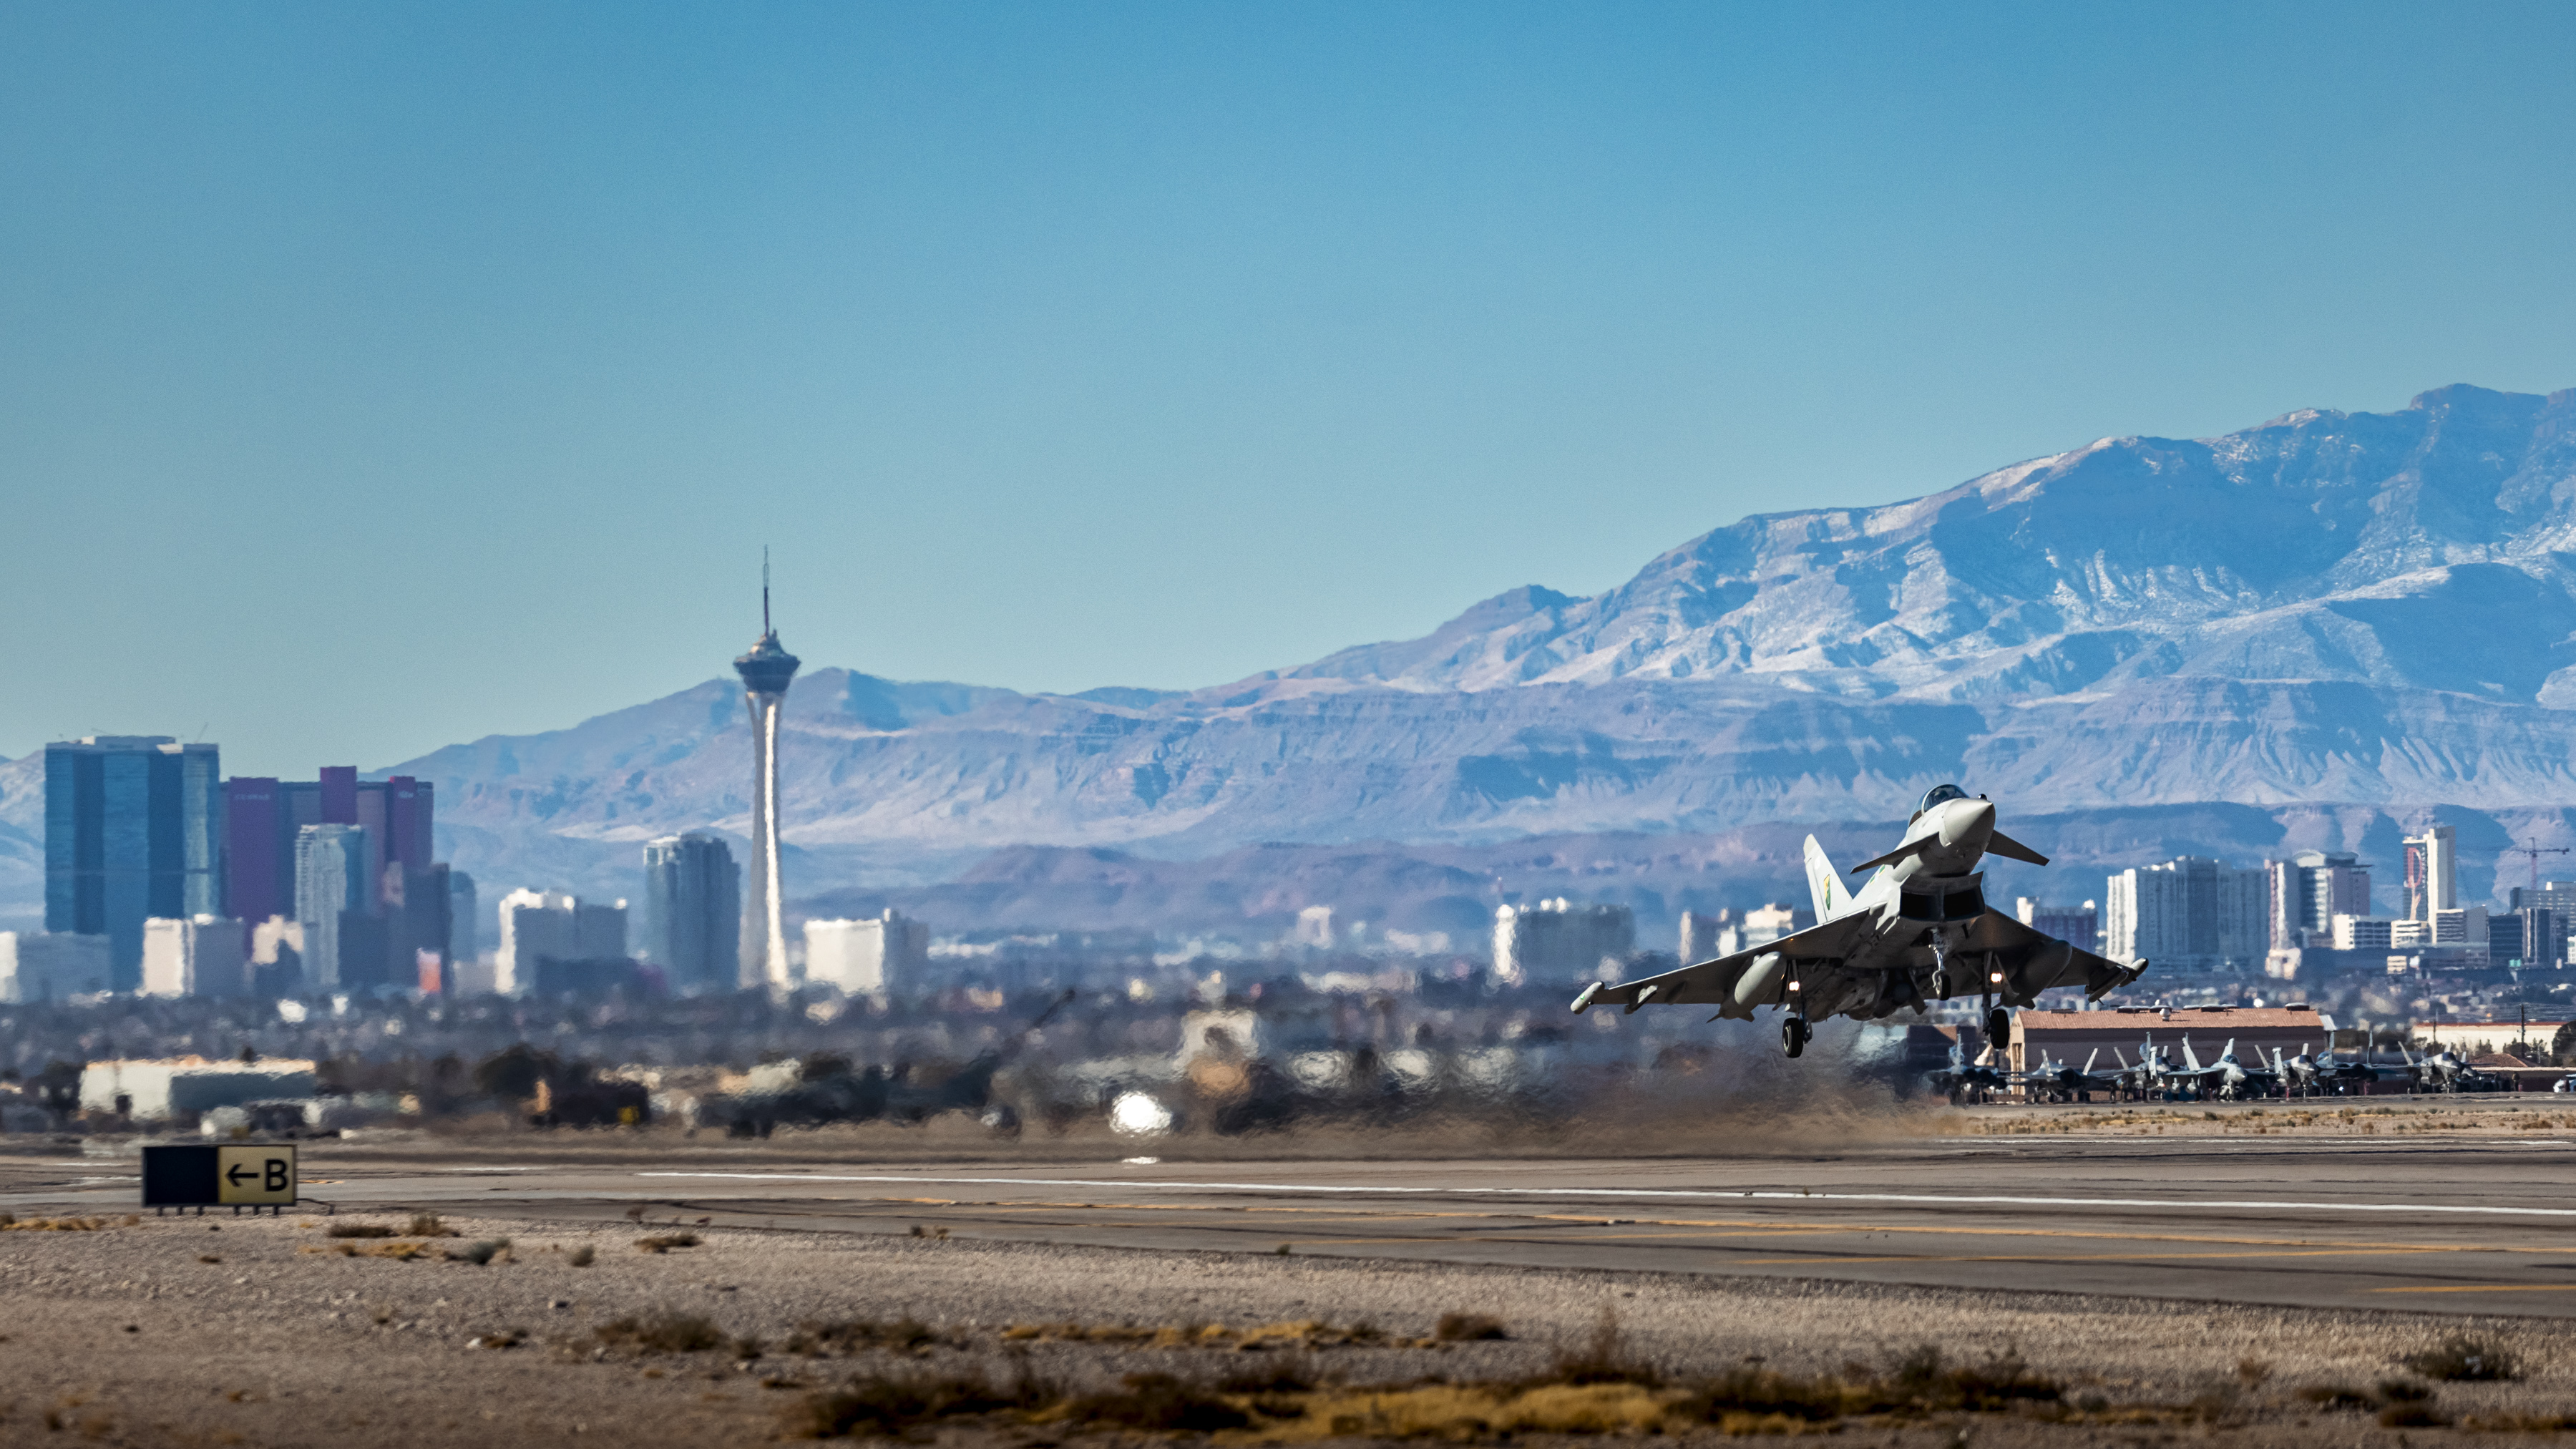 Typhoon taking off with mountains in the background